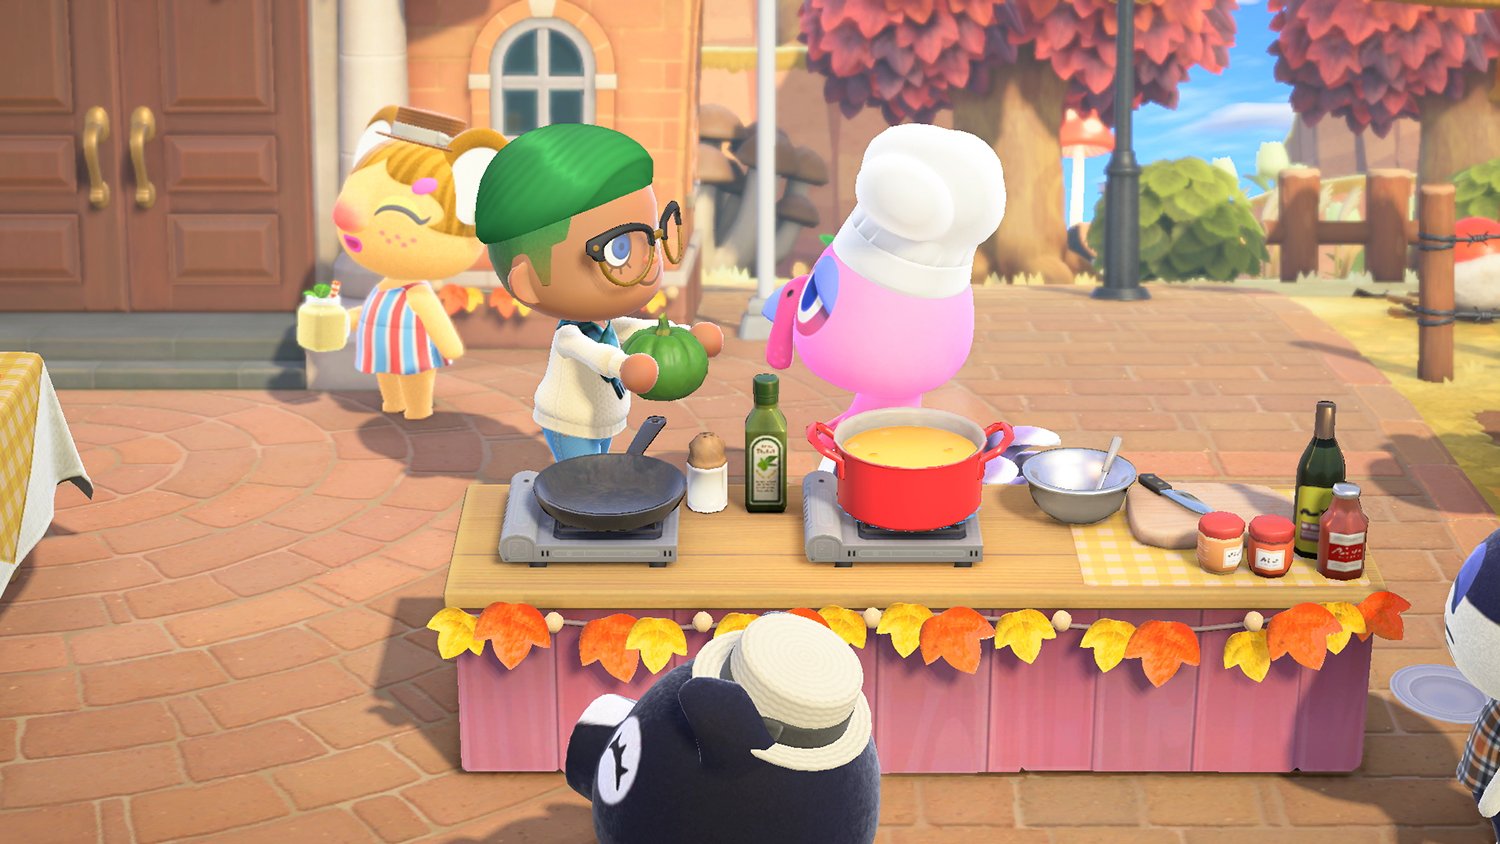 A villager hands Franklin a green pumpkin during the Animal Crossing: New Horizons Turkey Day event